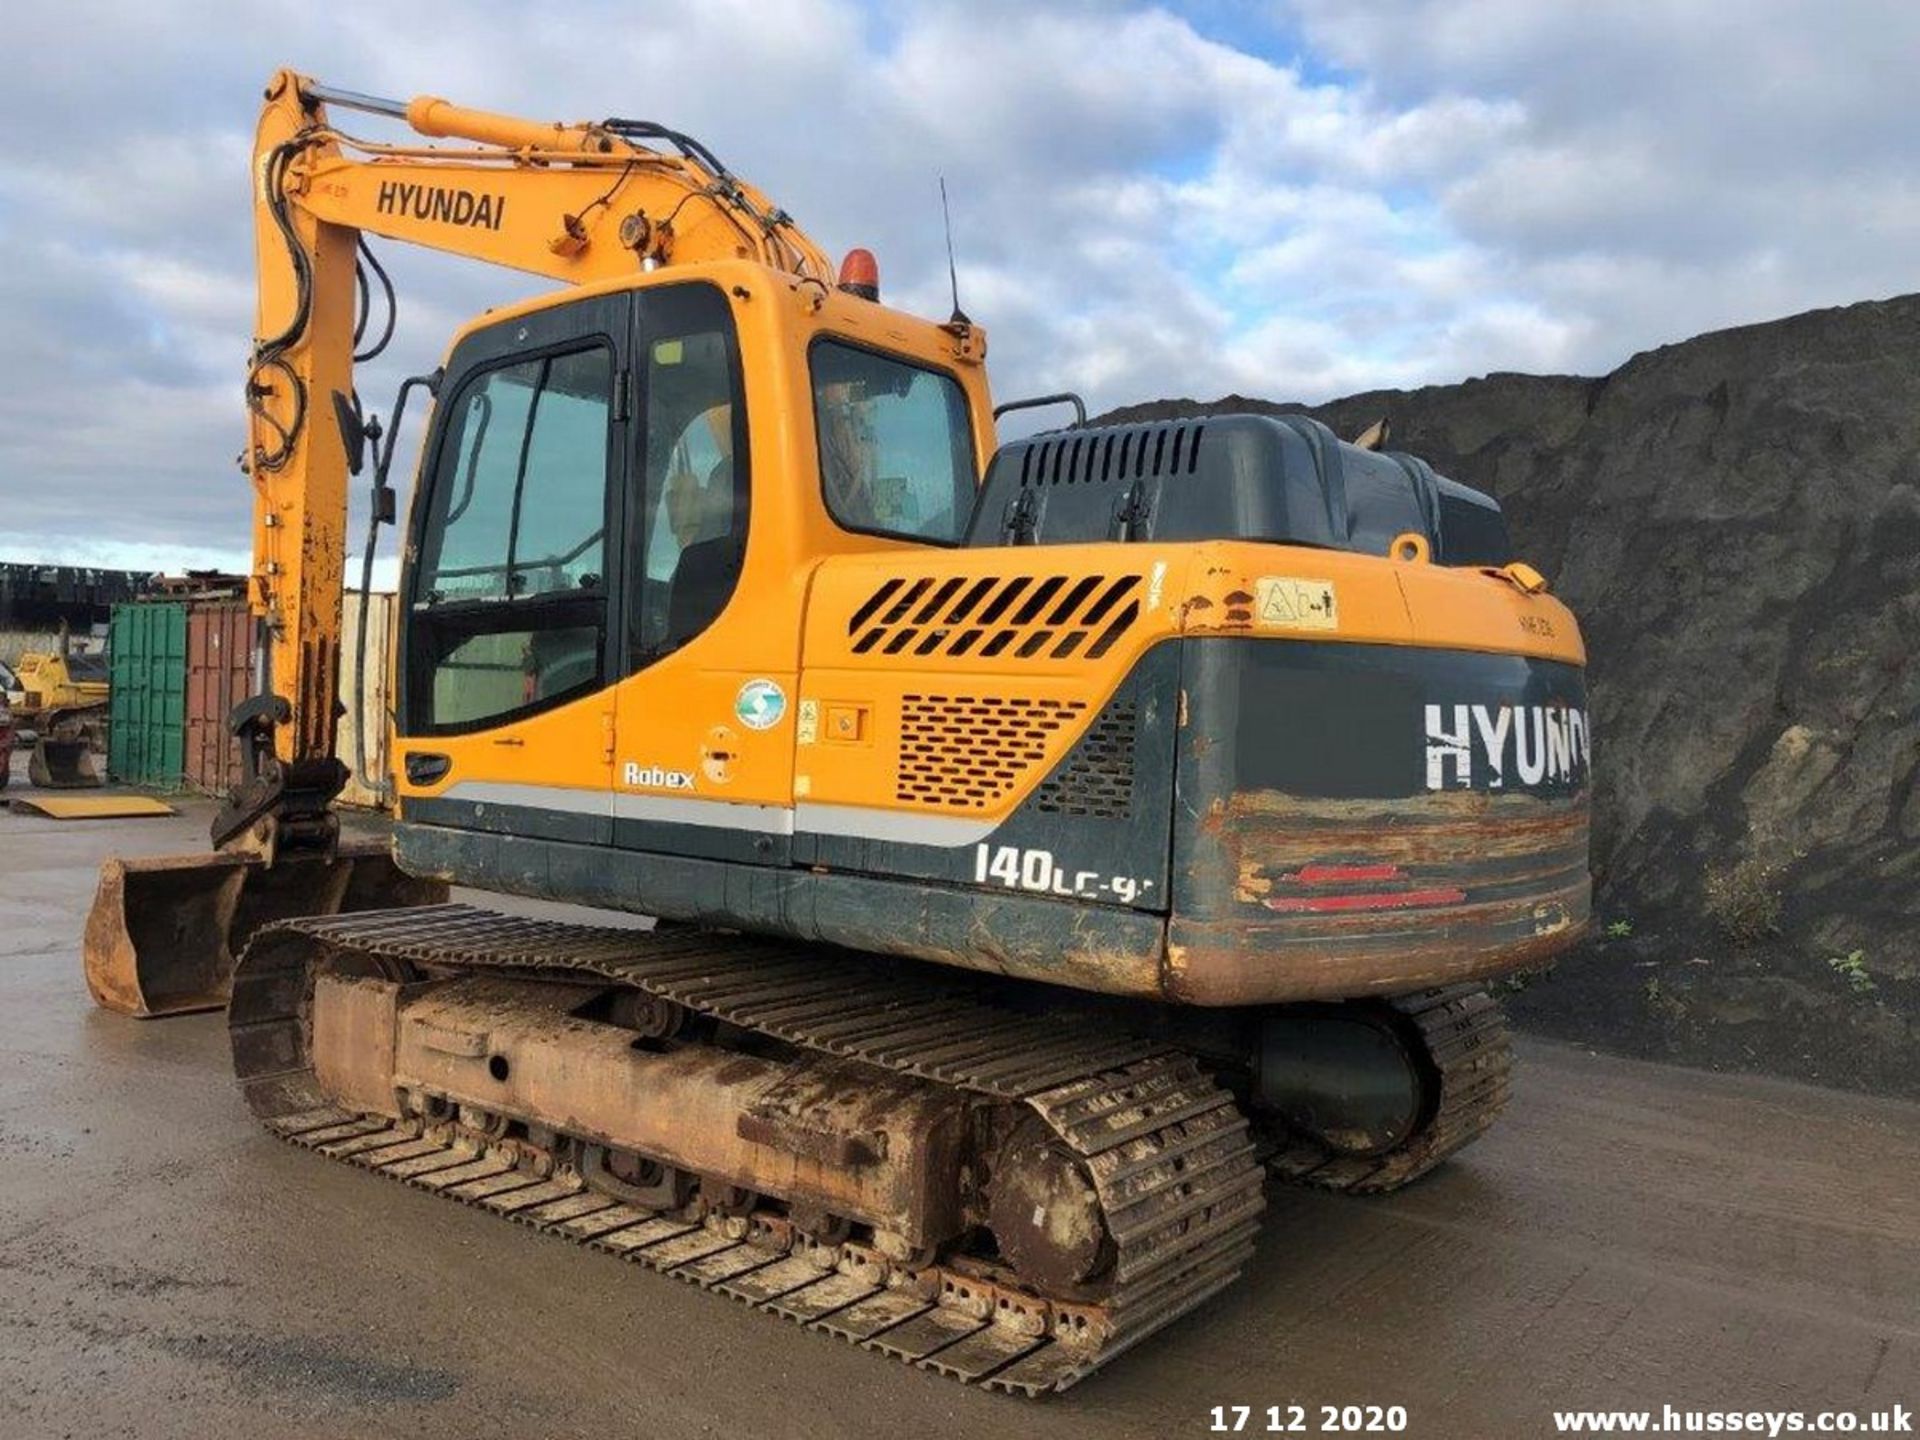 HYUNDAI ROBEX 140 LC-9A EXCAVATOR 2014 5507HRS C.W HAMMER CIRCUIT, HYDRAULIC HITCH & 2 BUCKETS - Image 3 of 19